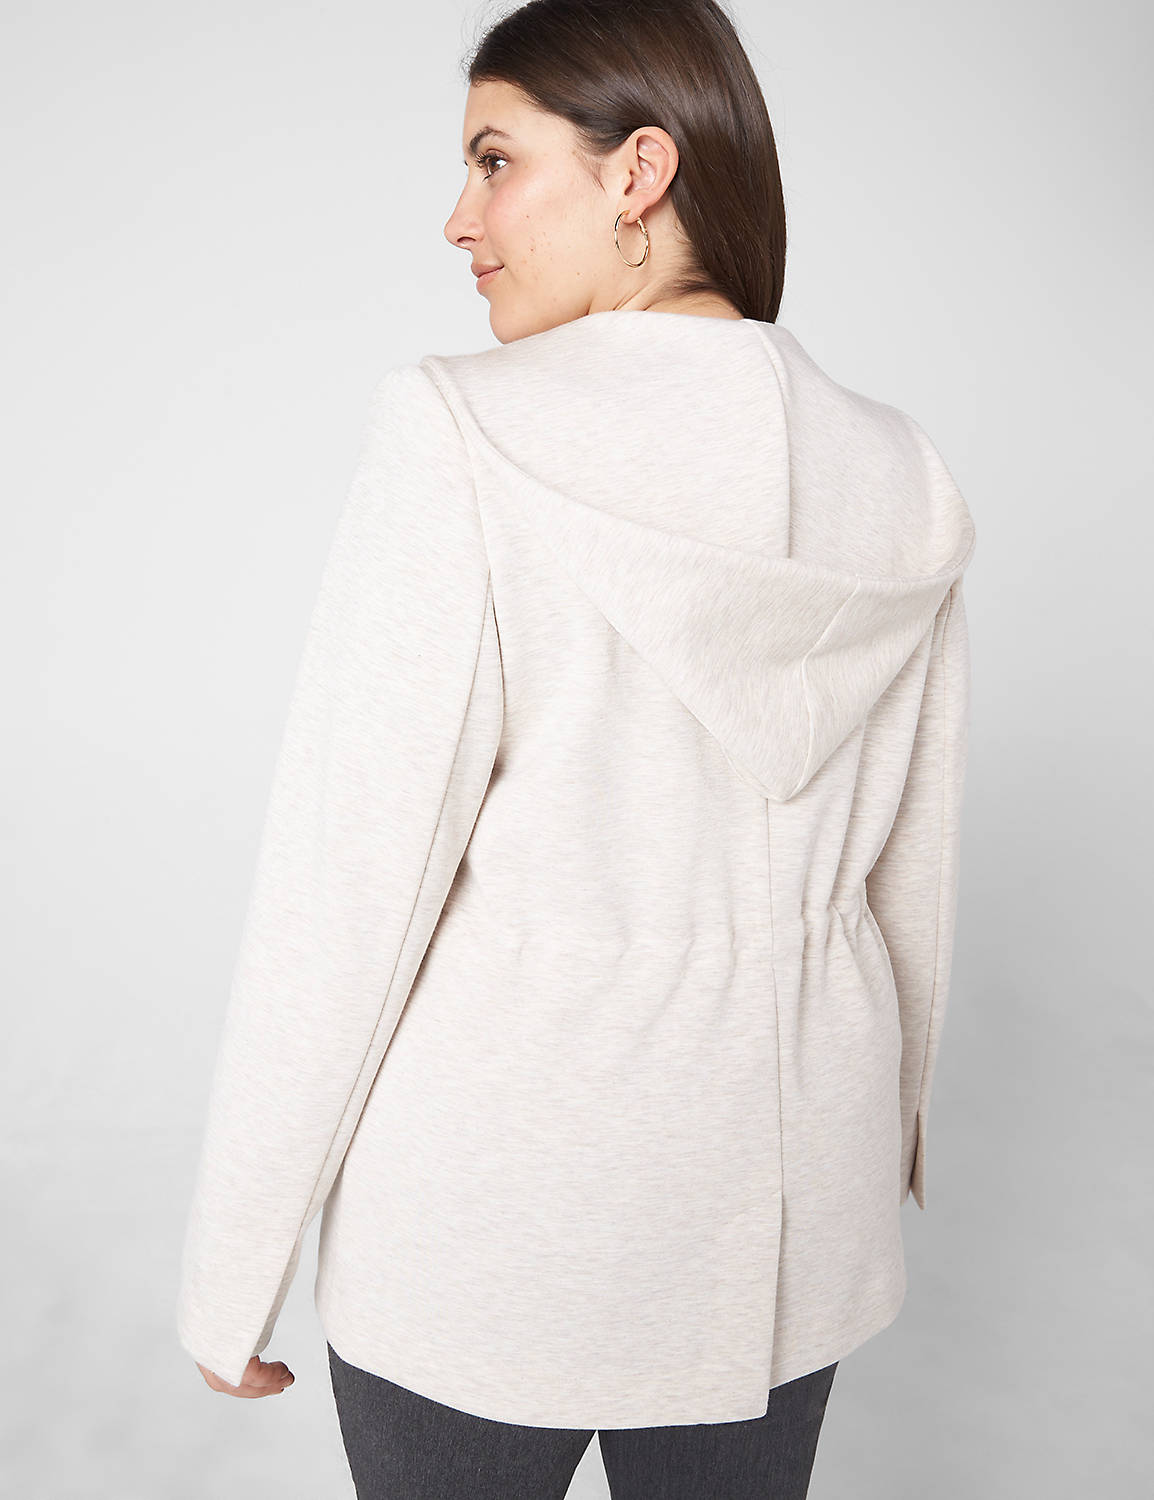 Hooded Drape Jacket in Double Face Product Image 2